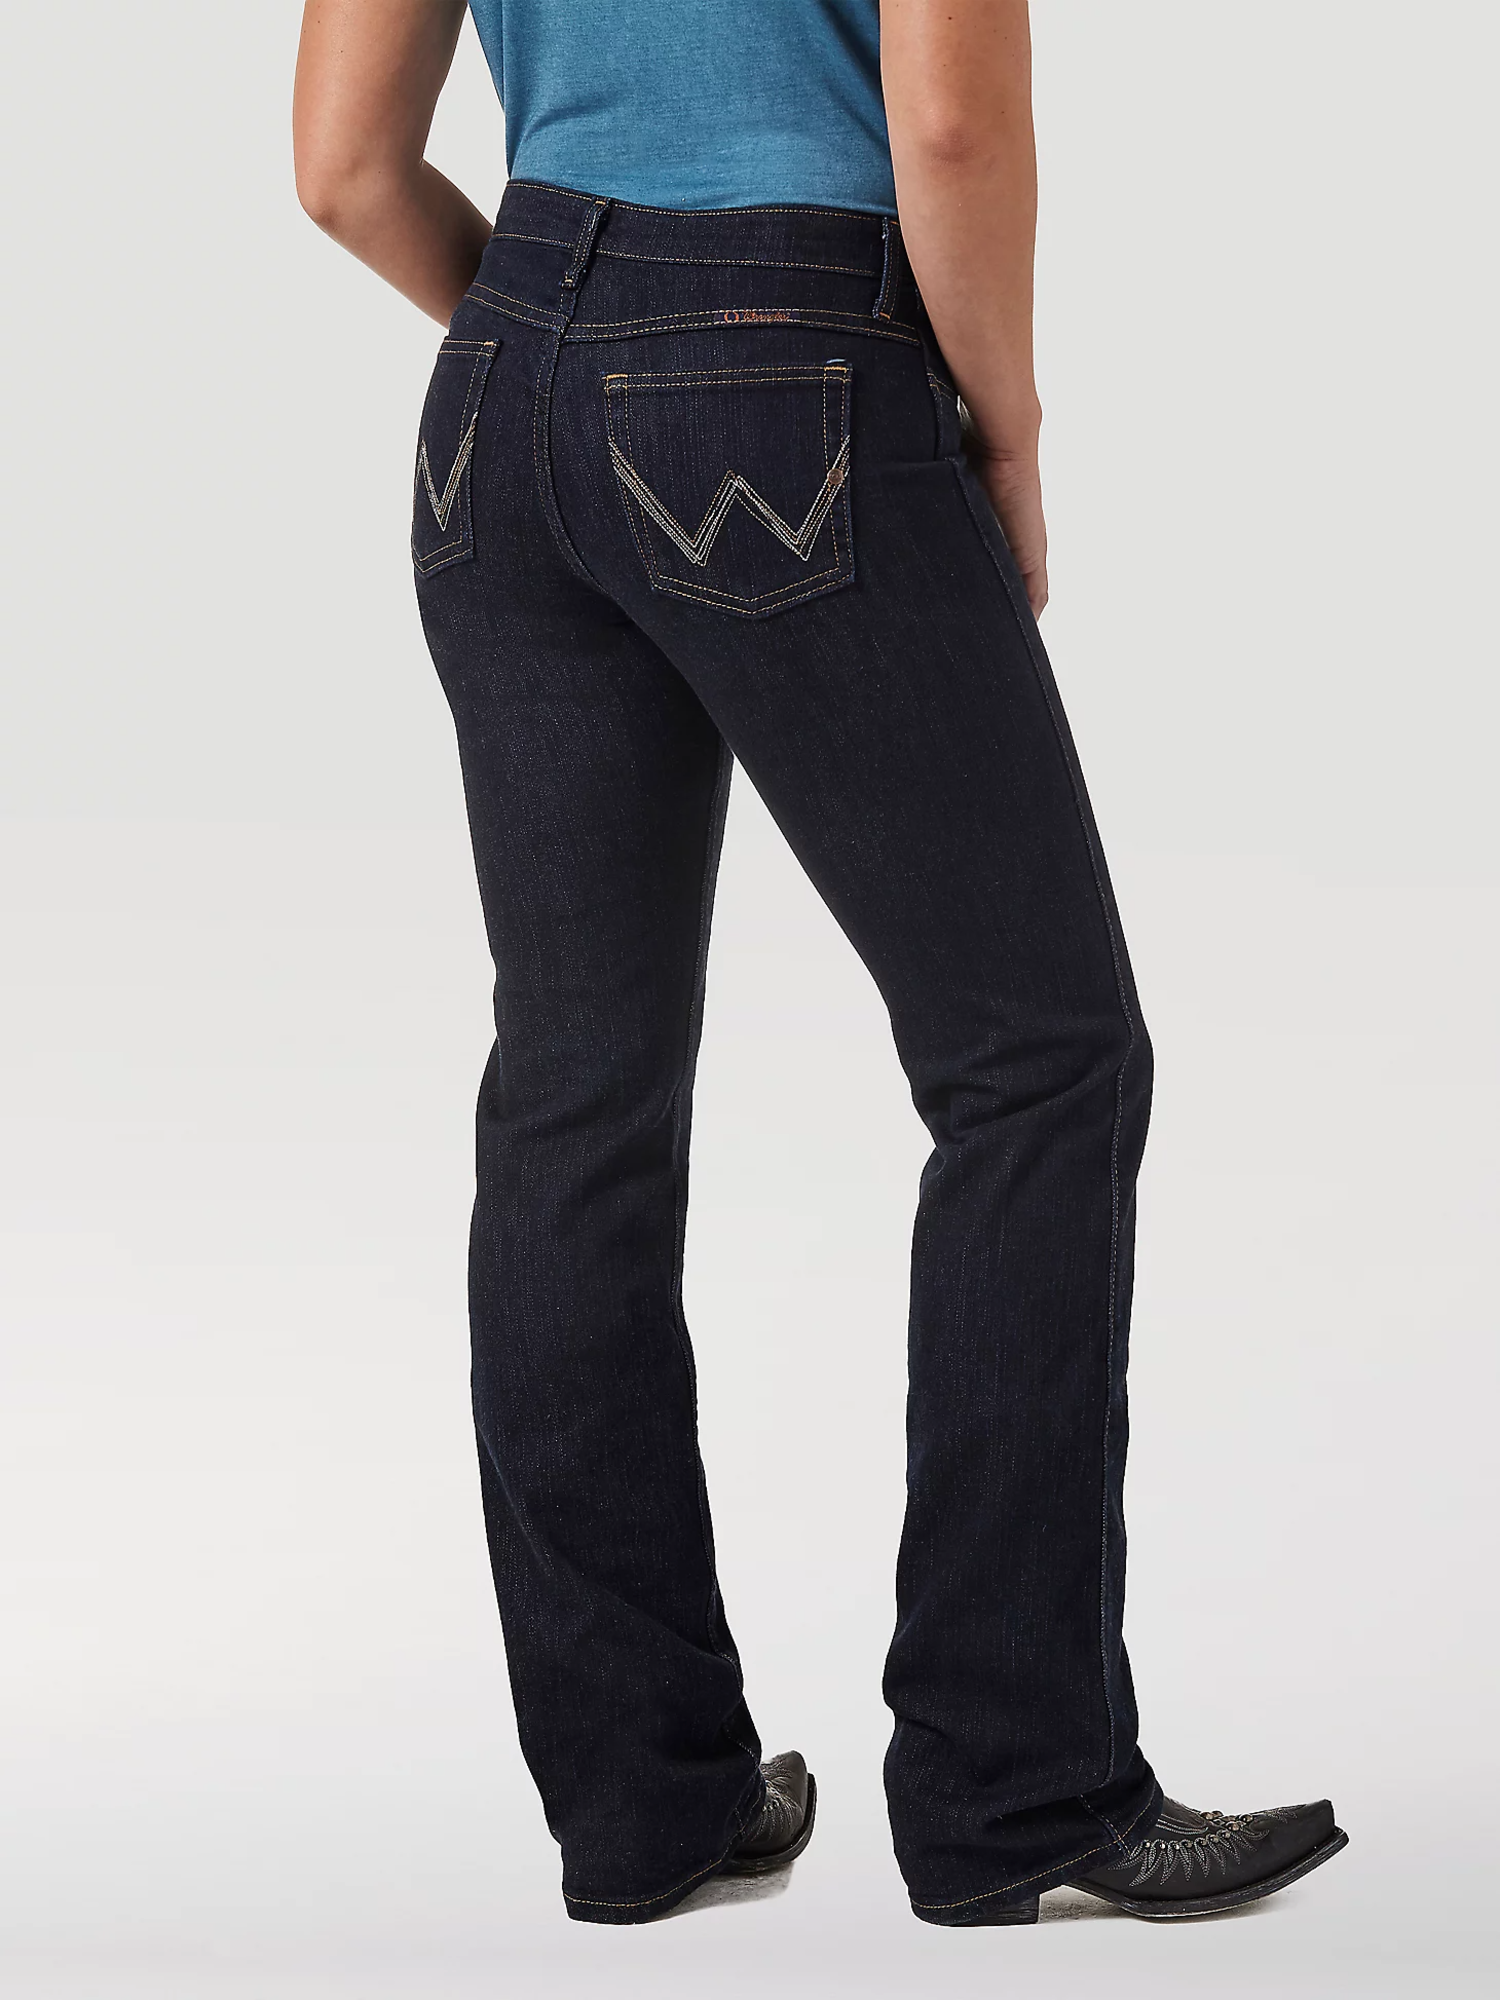 Wrangler Ladies Q-Baby Ultimate Riding Jeans - Frontier Western Shop